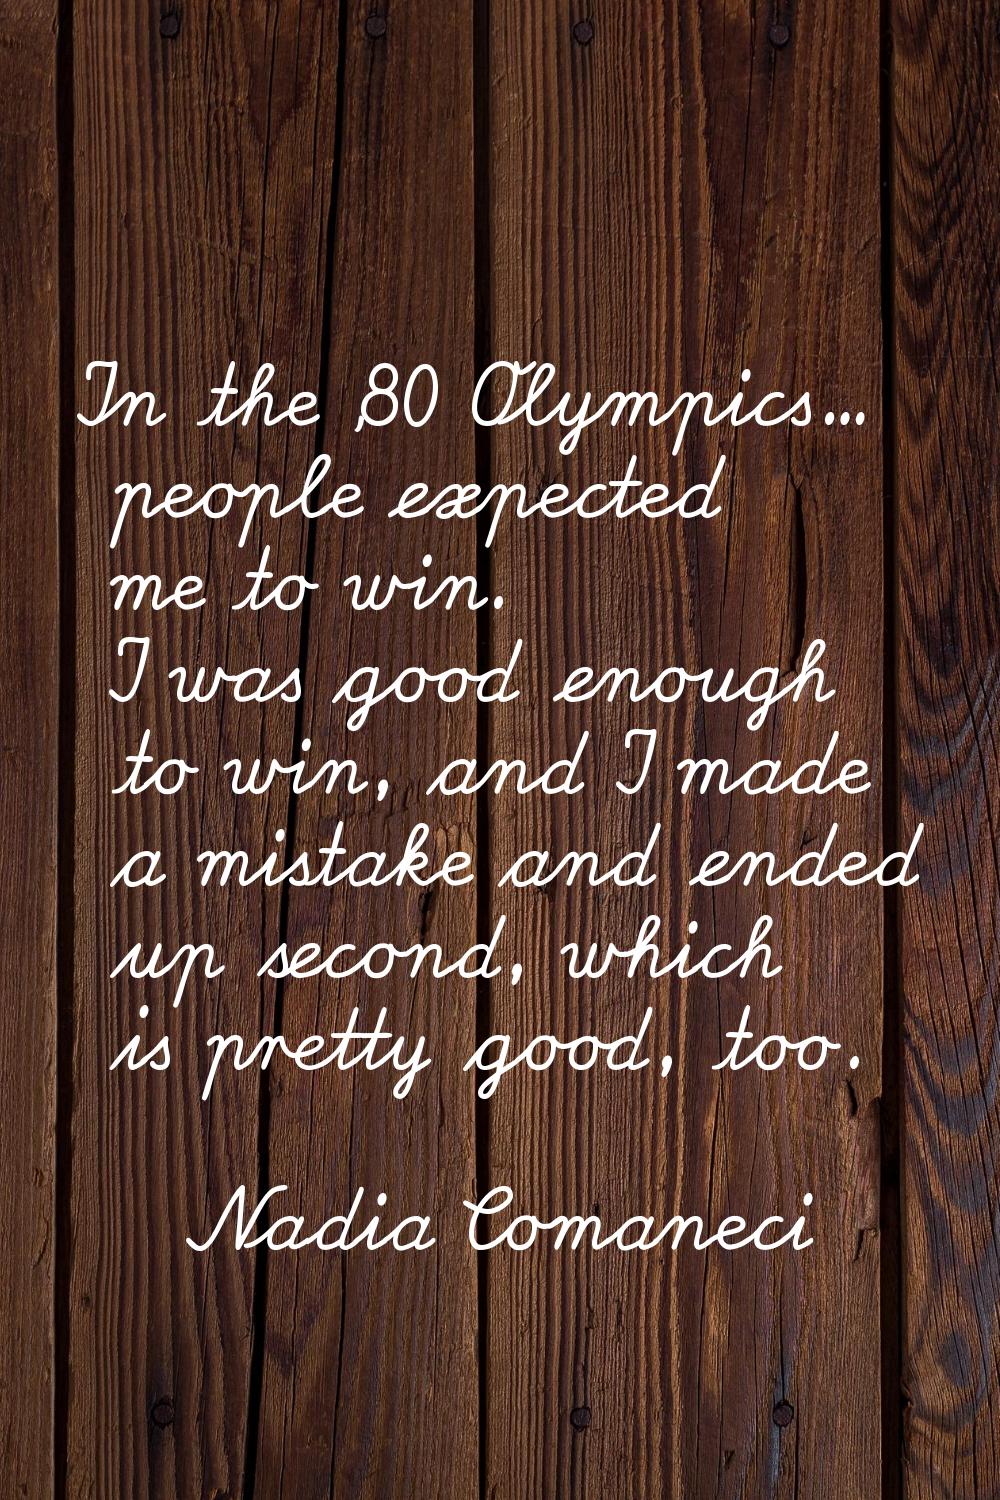 In the '80 Olympics... people expected me to win. I was good enough to win, and I made a mistake an